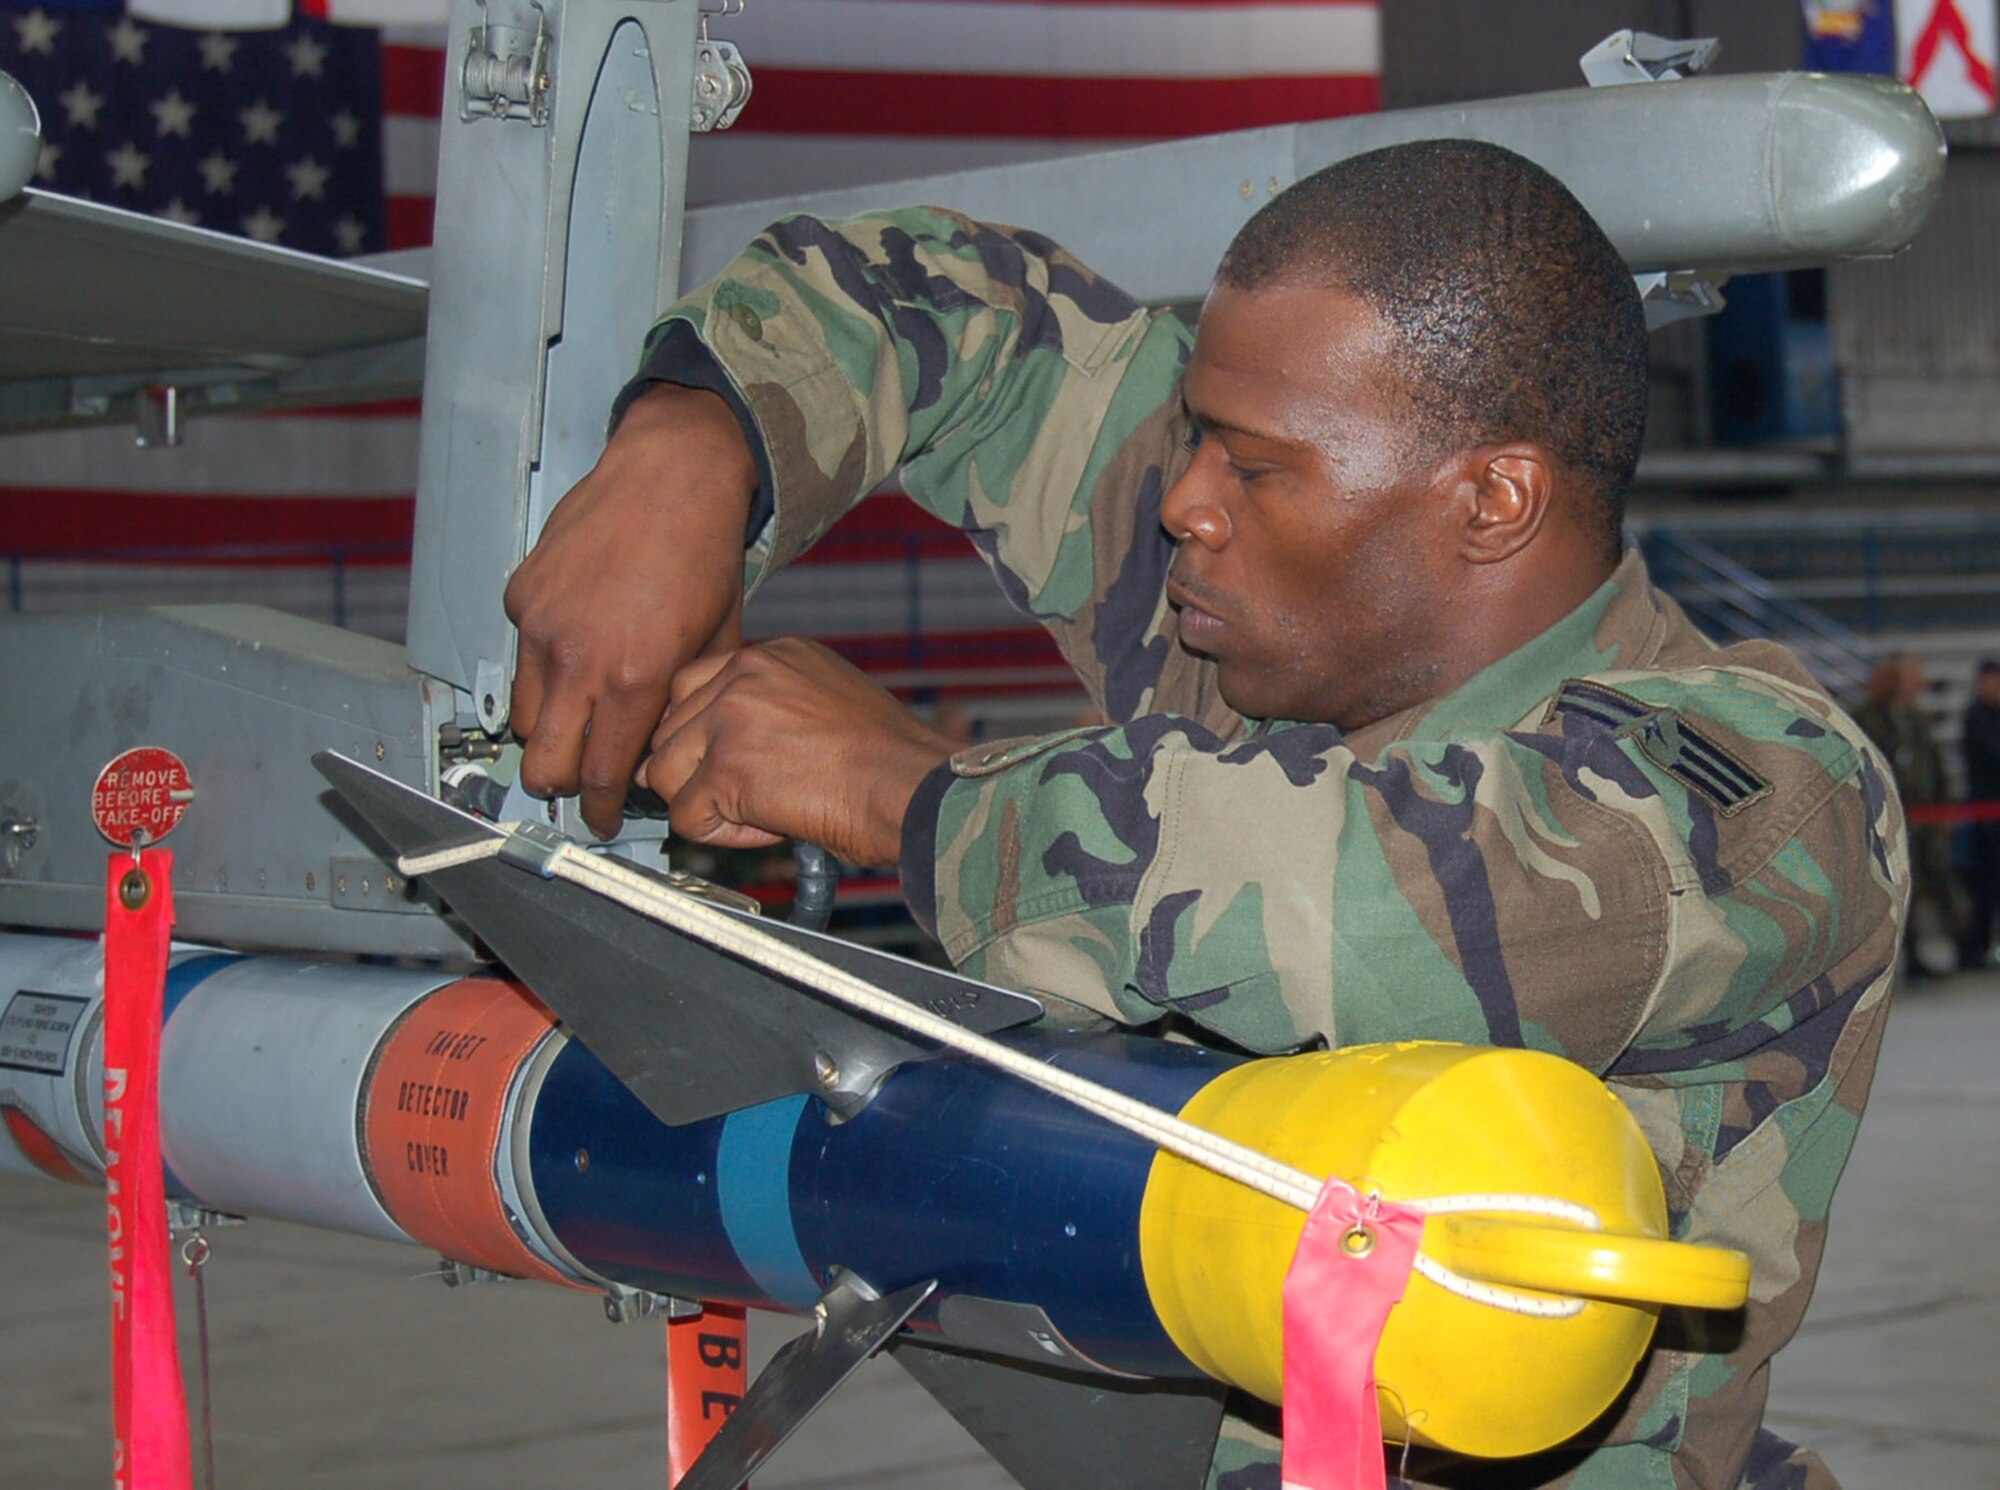 SPANGDAHLEM AIR BASE, Germany – Senior Airman Damon Clark, 23rd Aircraft Maintenance Unit load crew, secures an A1M 9 missile during a weapons load competition Sept. 11. The 23rd AMU load crew won the competition. (U.S. Air Force photo/Staff Sgt. Tammie Moore) 